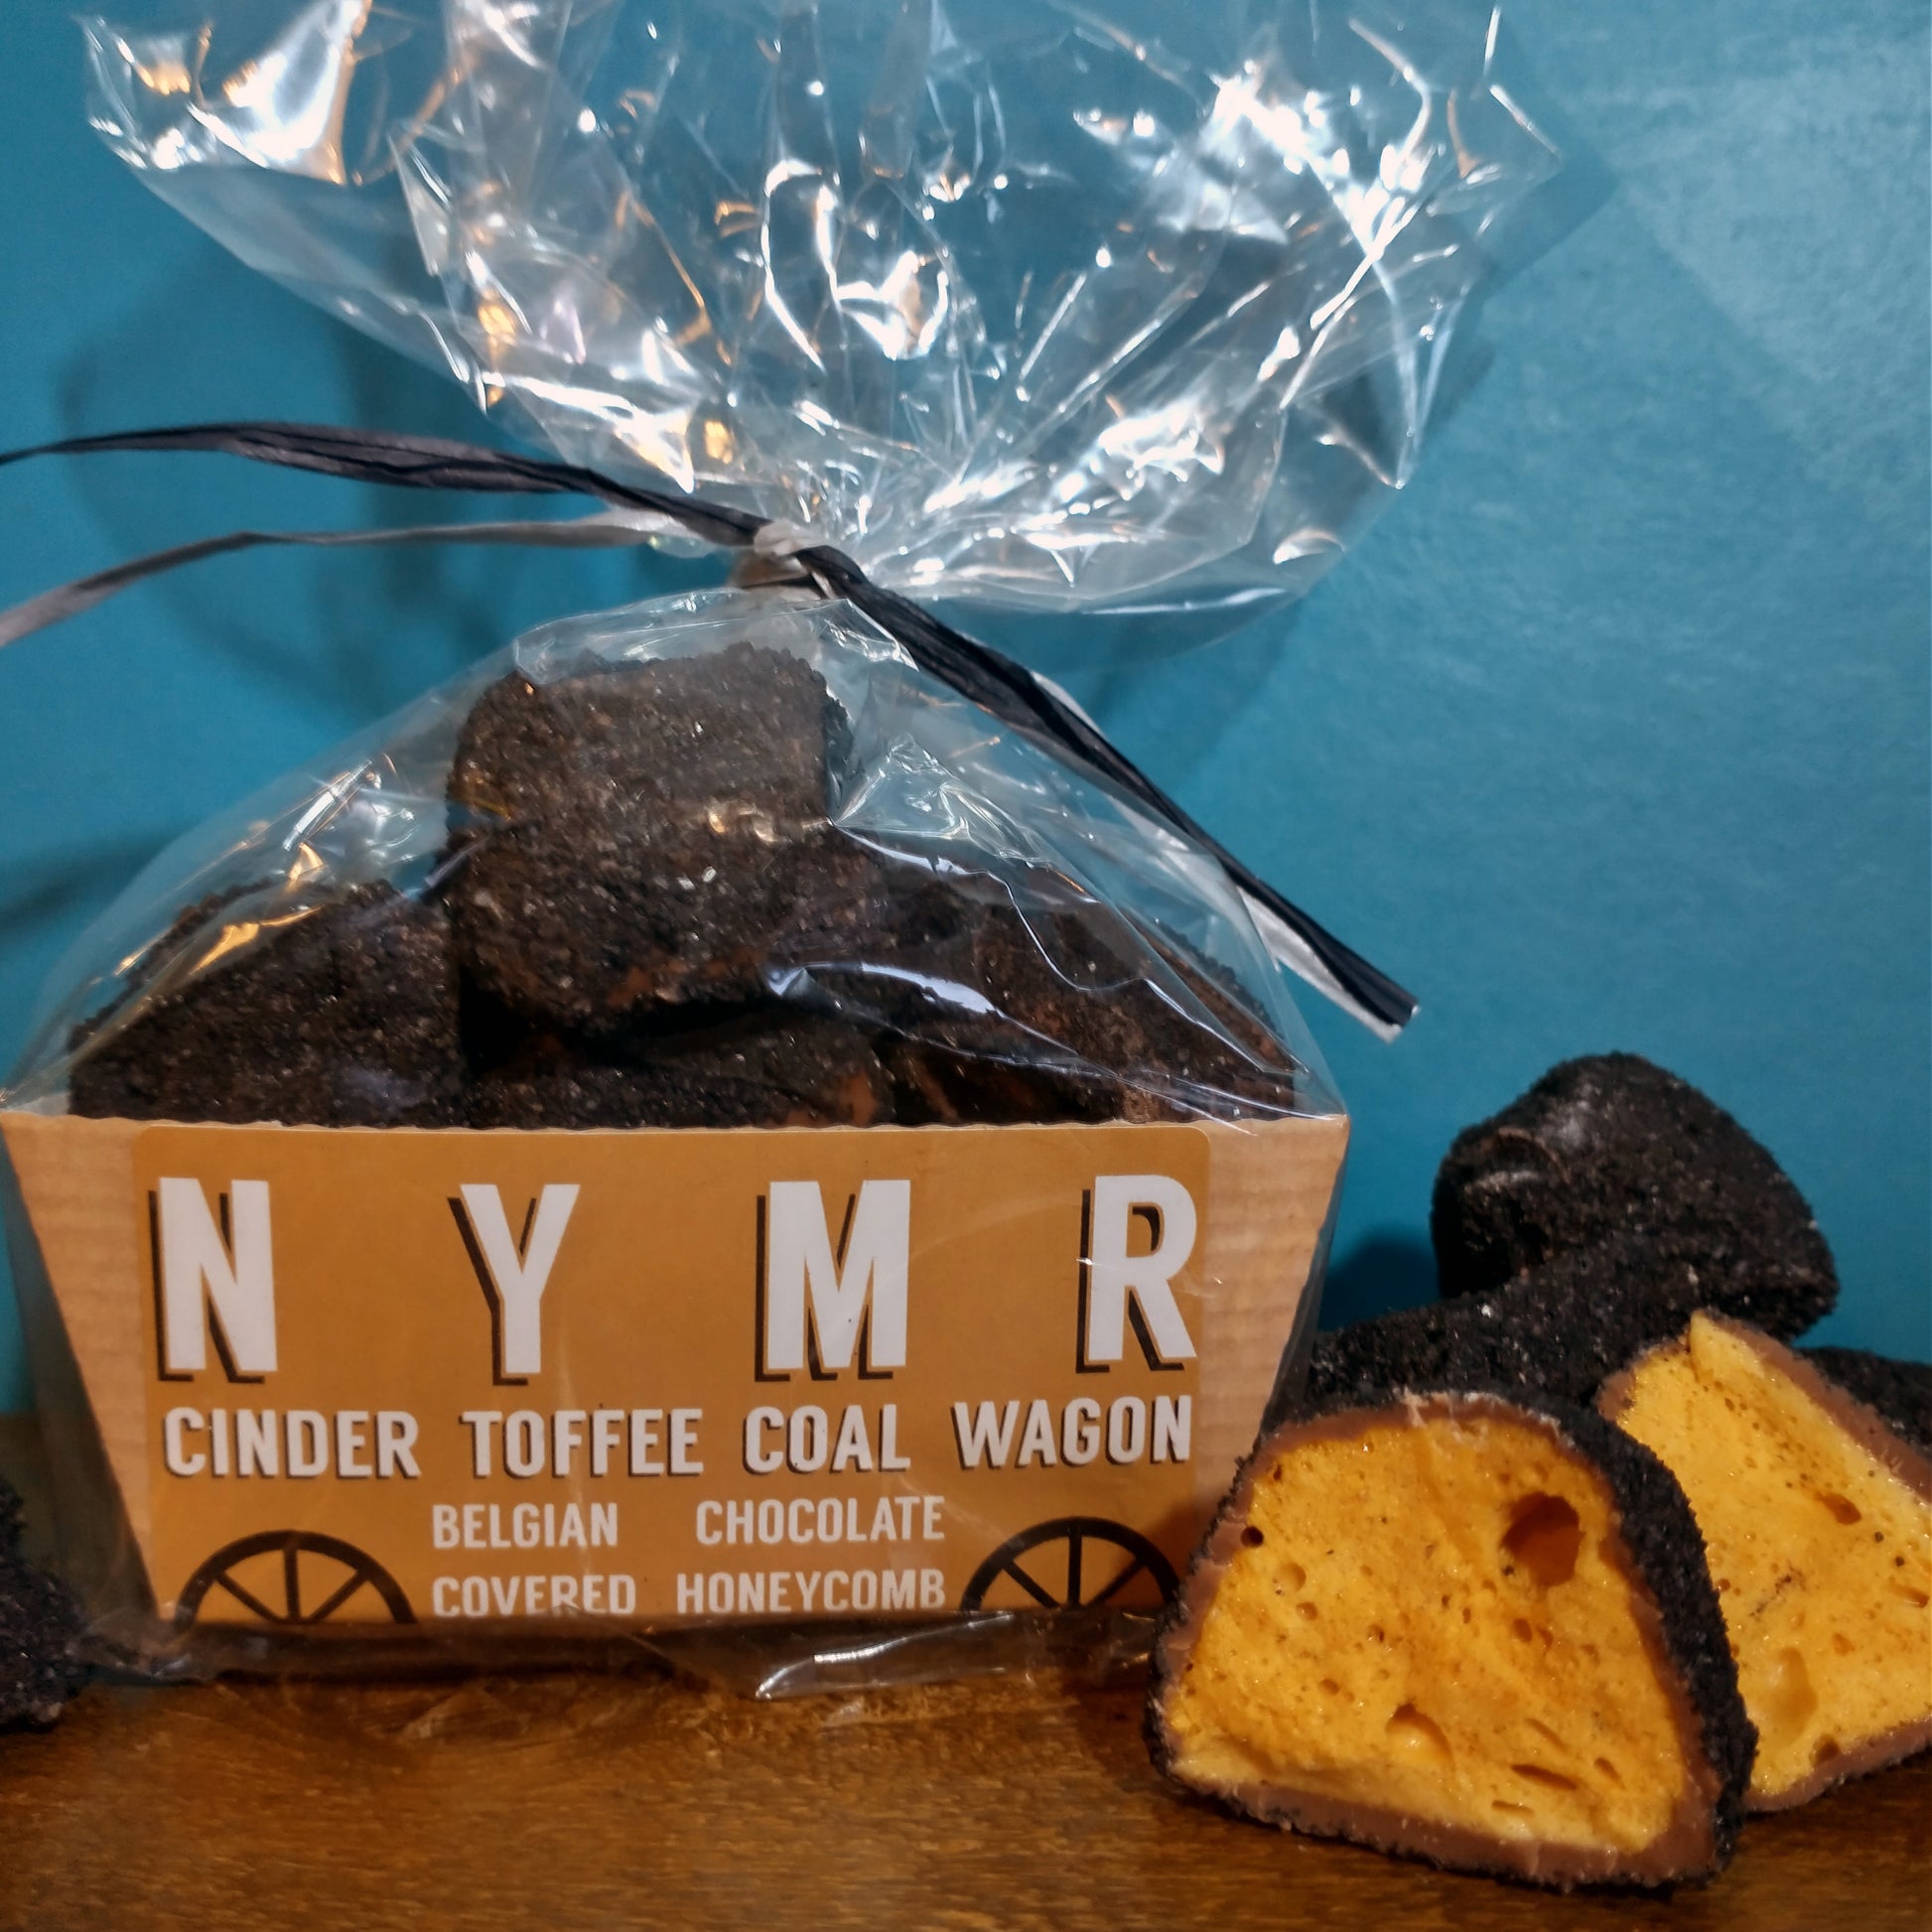 A cellophane bag containing lumps of chocolate coal in a brown railway style wagon. There are chunks of the coal next to the packet which have been cut open to show the golden honeycomb and thick chocolate coating. Black sherbet covers each piece.